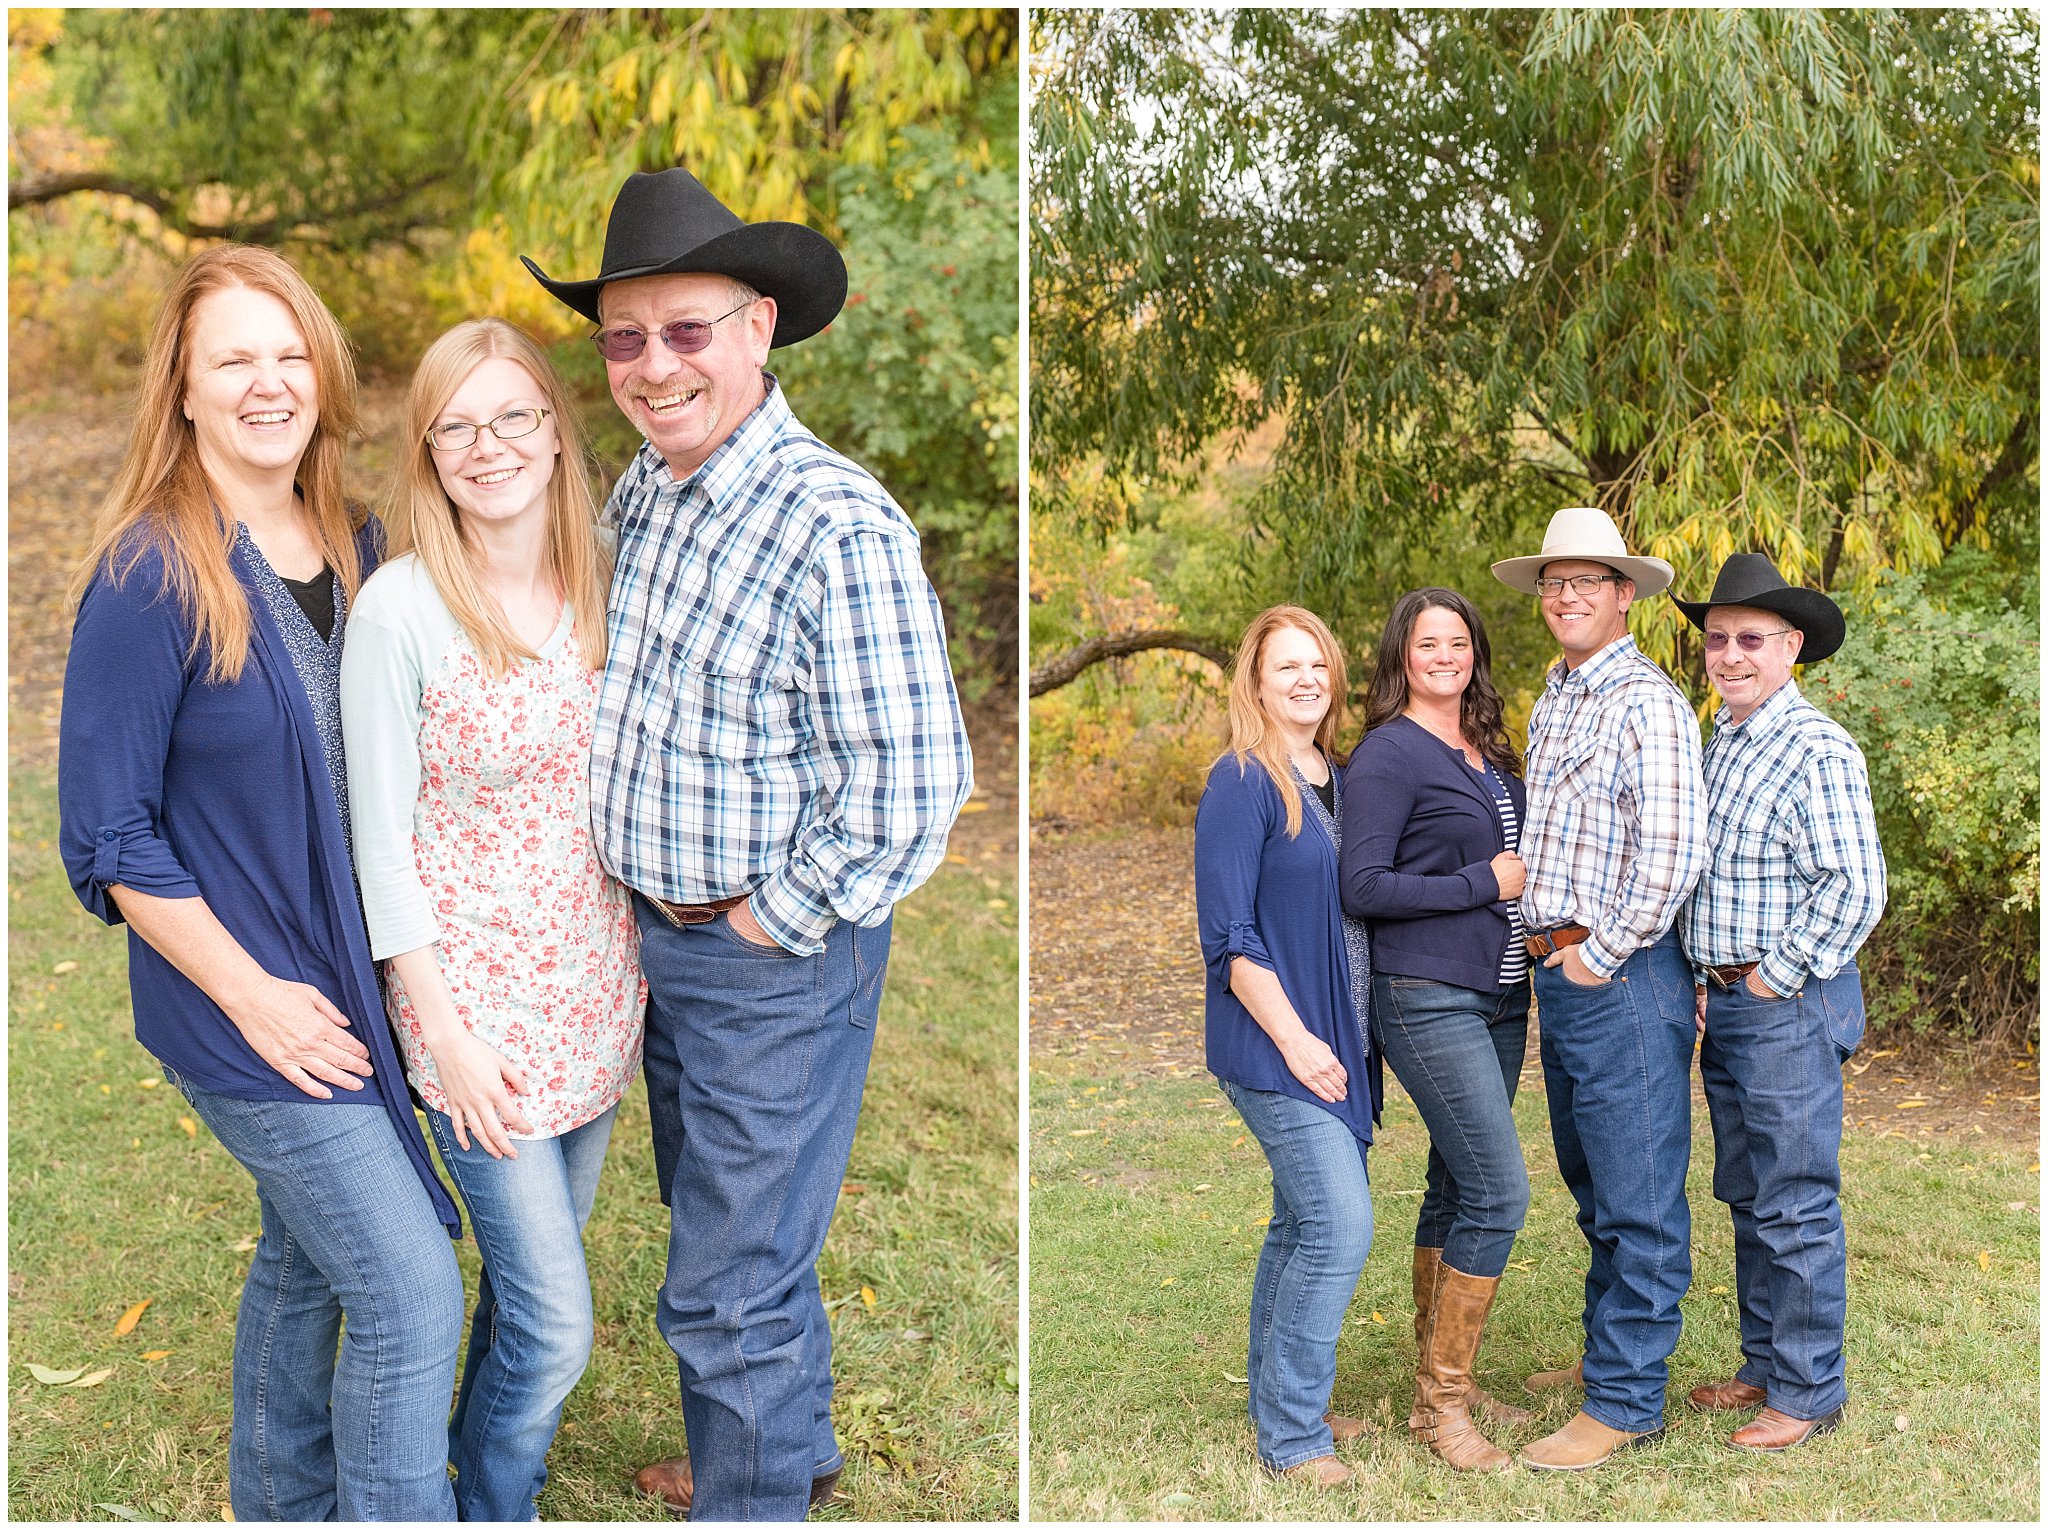 Adult children and their parents | Tremonton Family Pictures and Make a Wish Event | Jessie and Dallin Photography